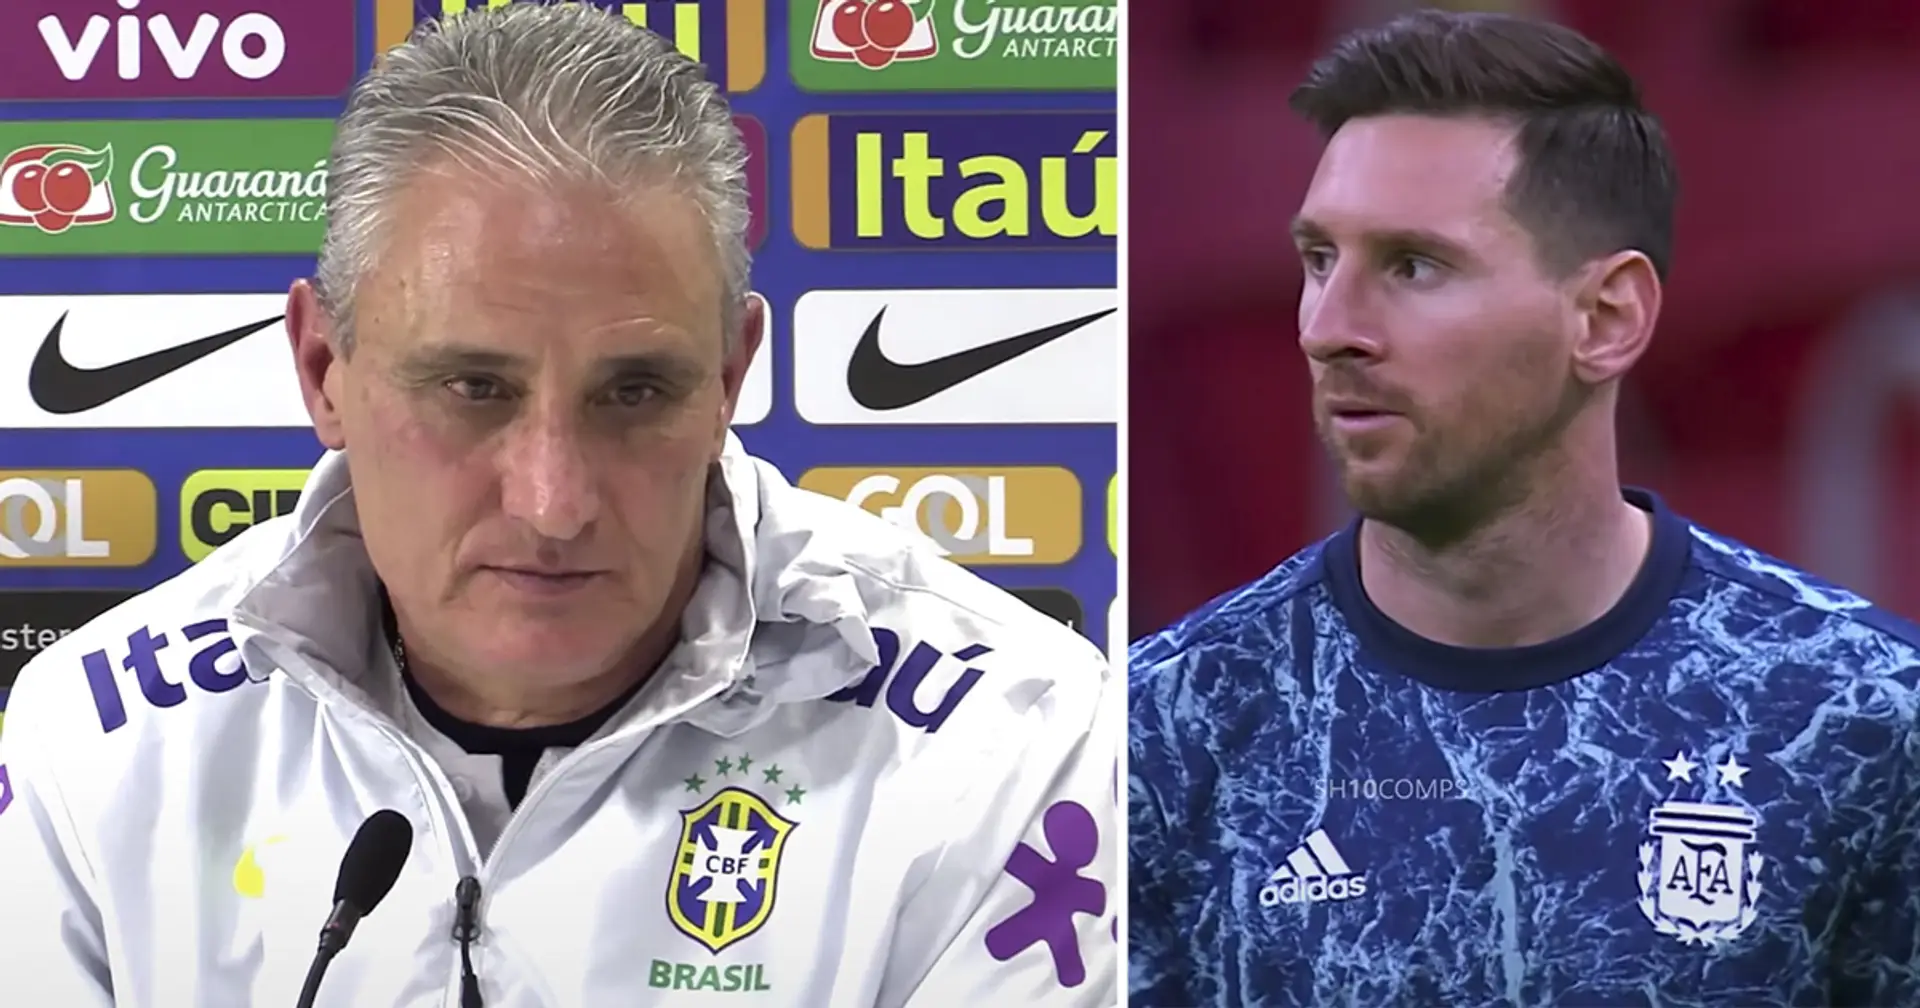 Brazil coach Tite claims he 'knows how to stop Messi' in Copa America final